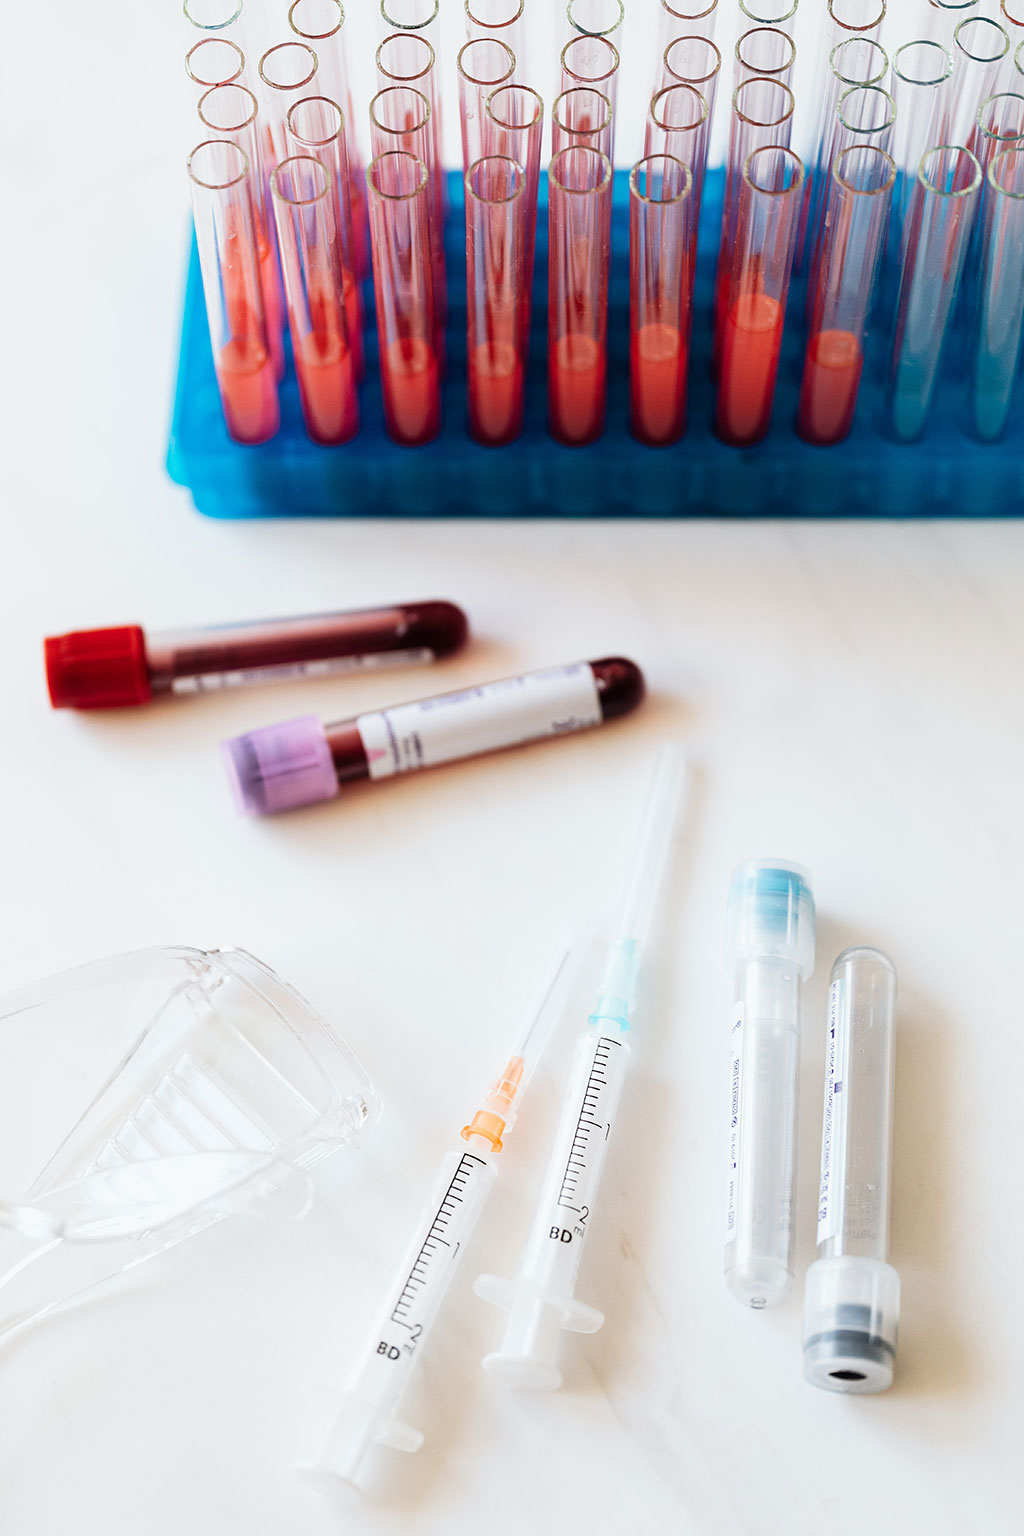 Image: Global blood collection devices market is projected to reach USD 7.8 billion by 2026 (Photo courtesy of Pexels)